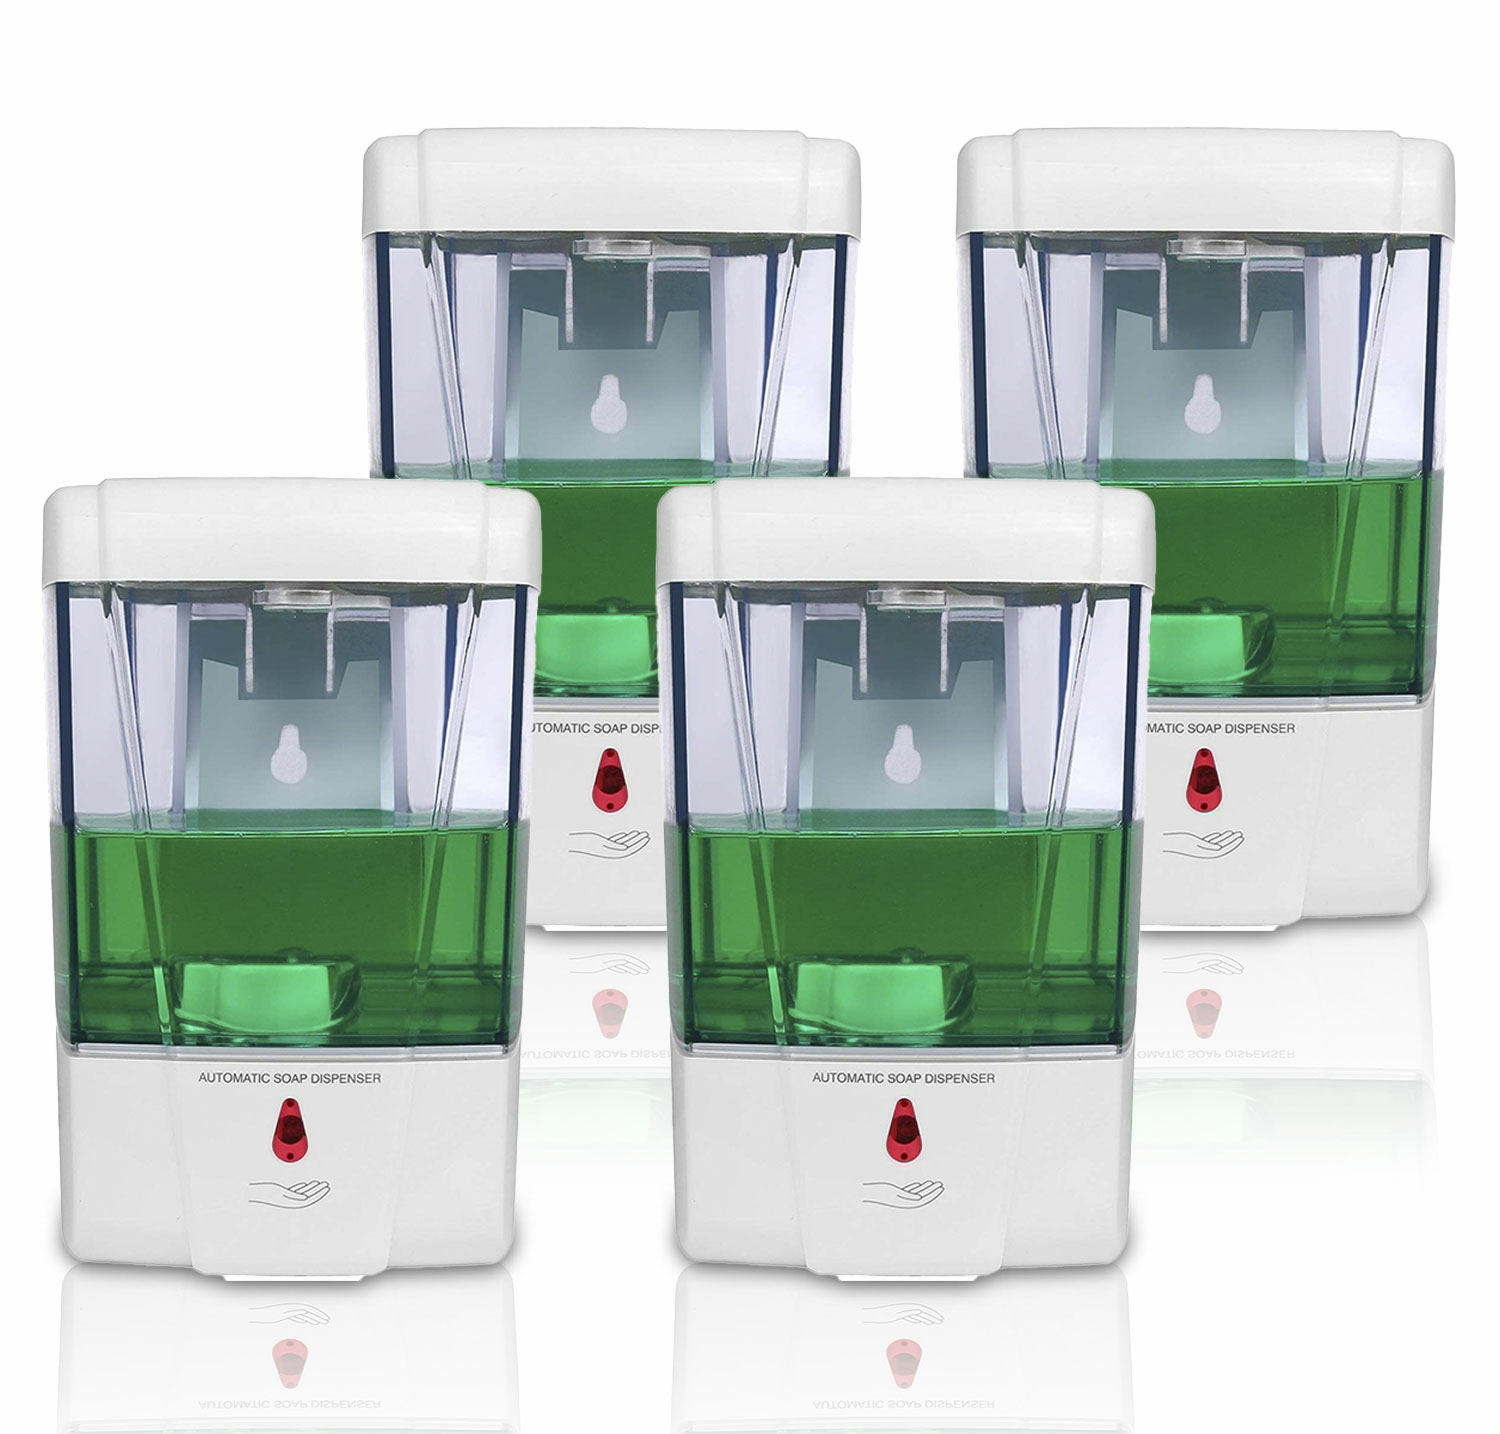 Automatic Dispenser for Soap/Sanitizer - 4 pack